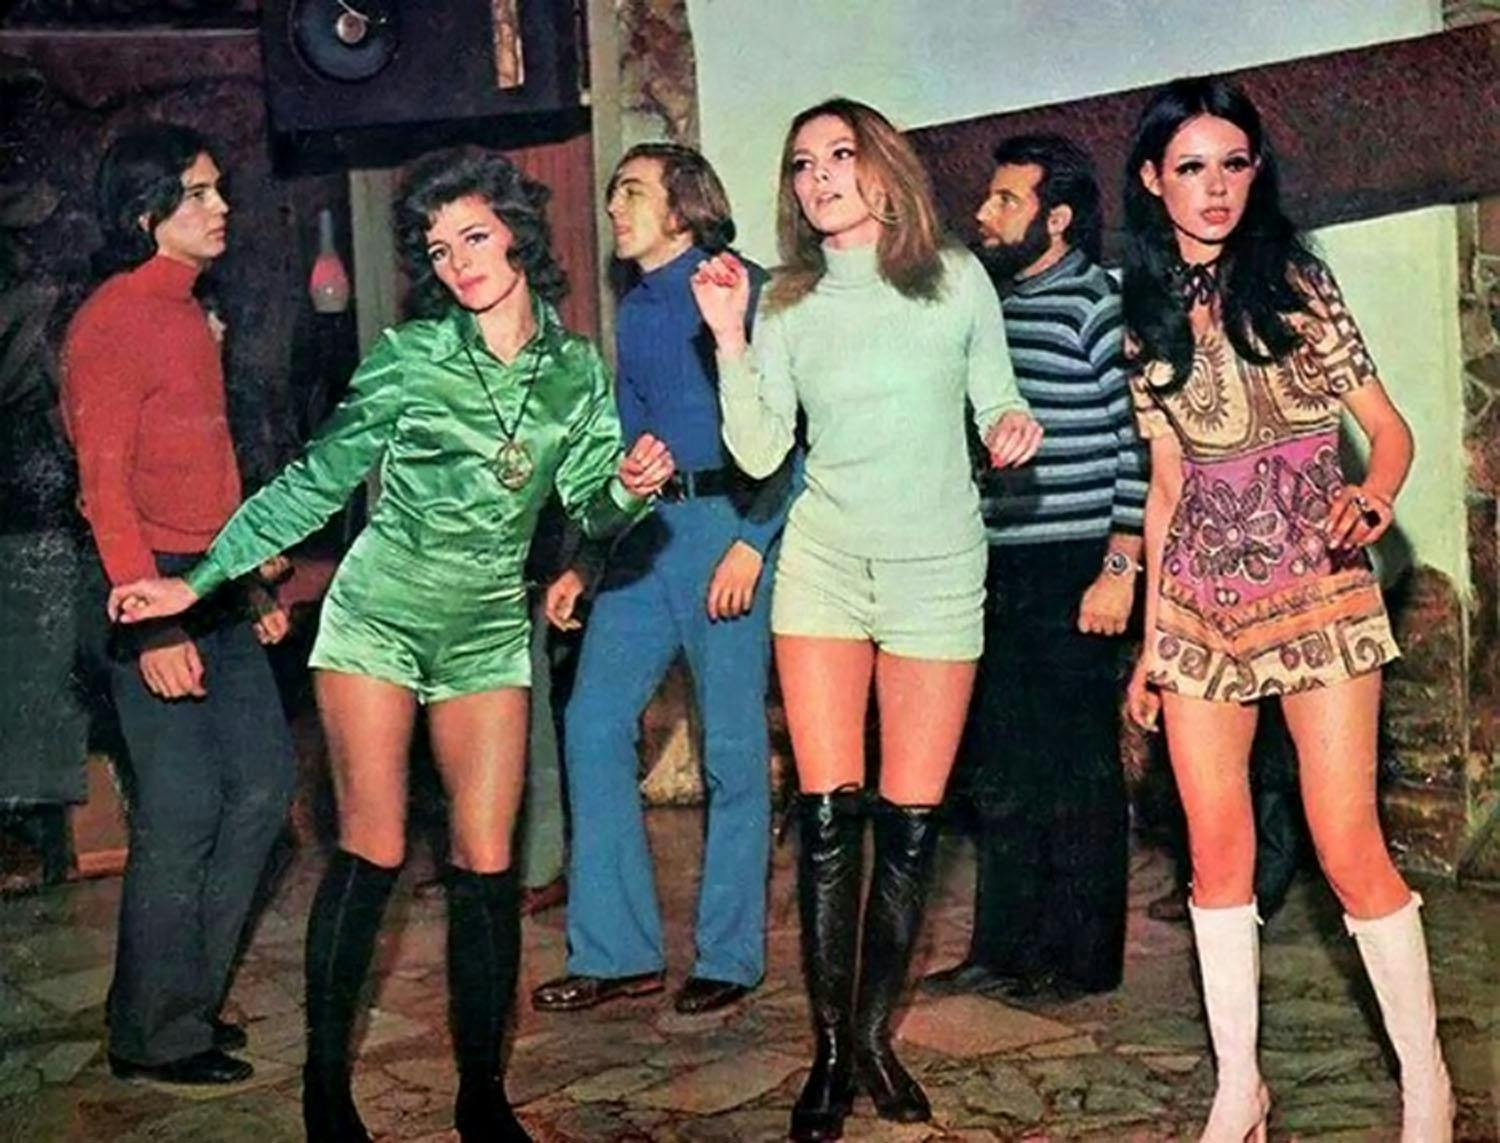 Sixties Dance Party (dance to your favorite pop hits from the 1960s)